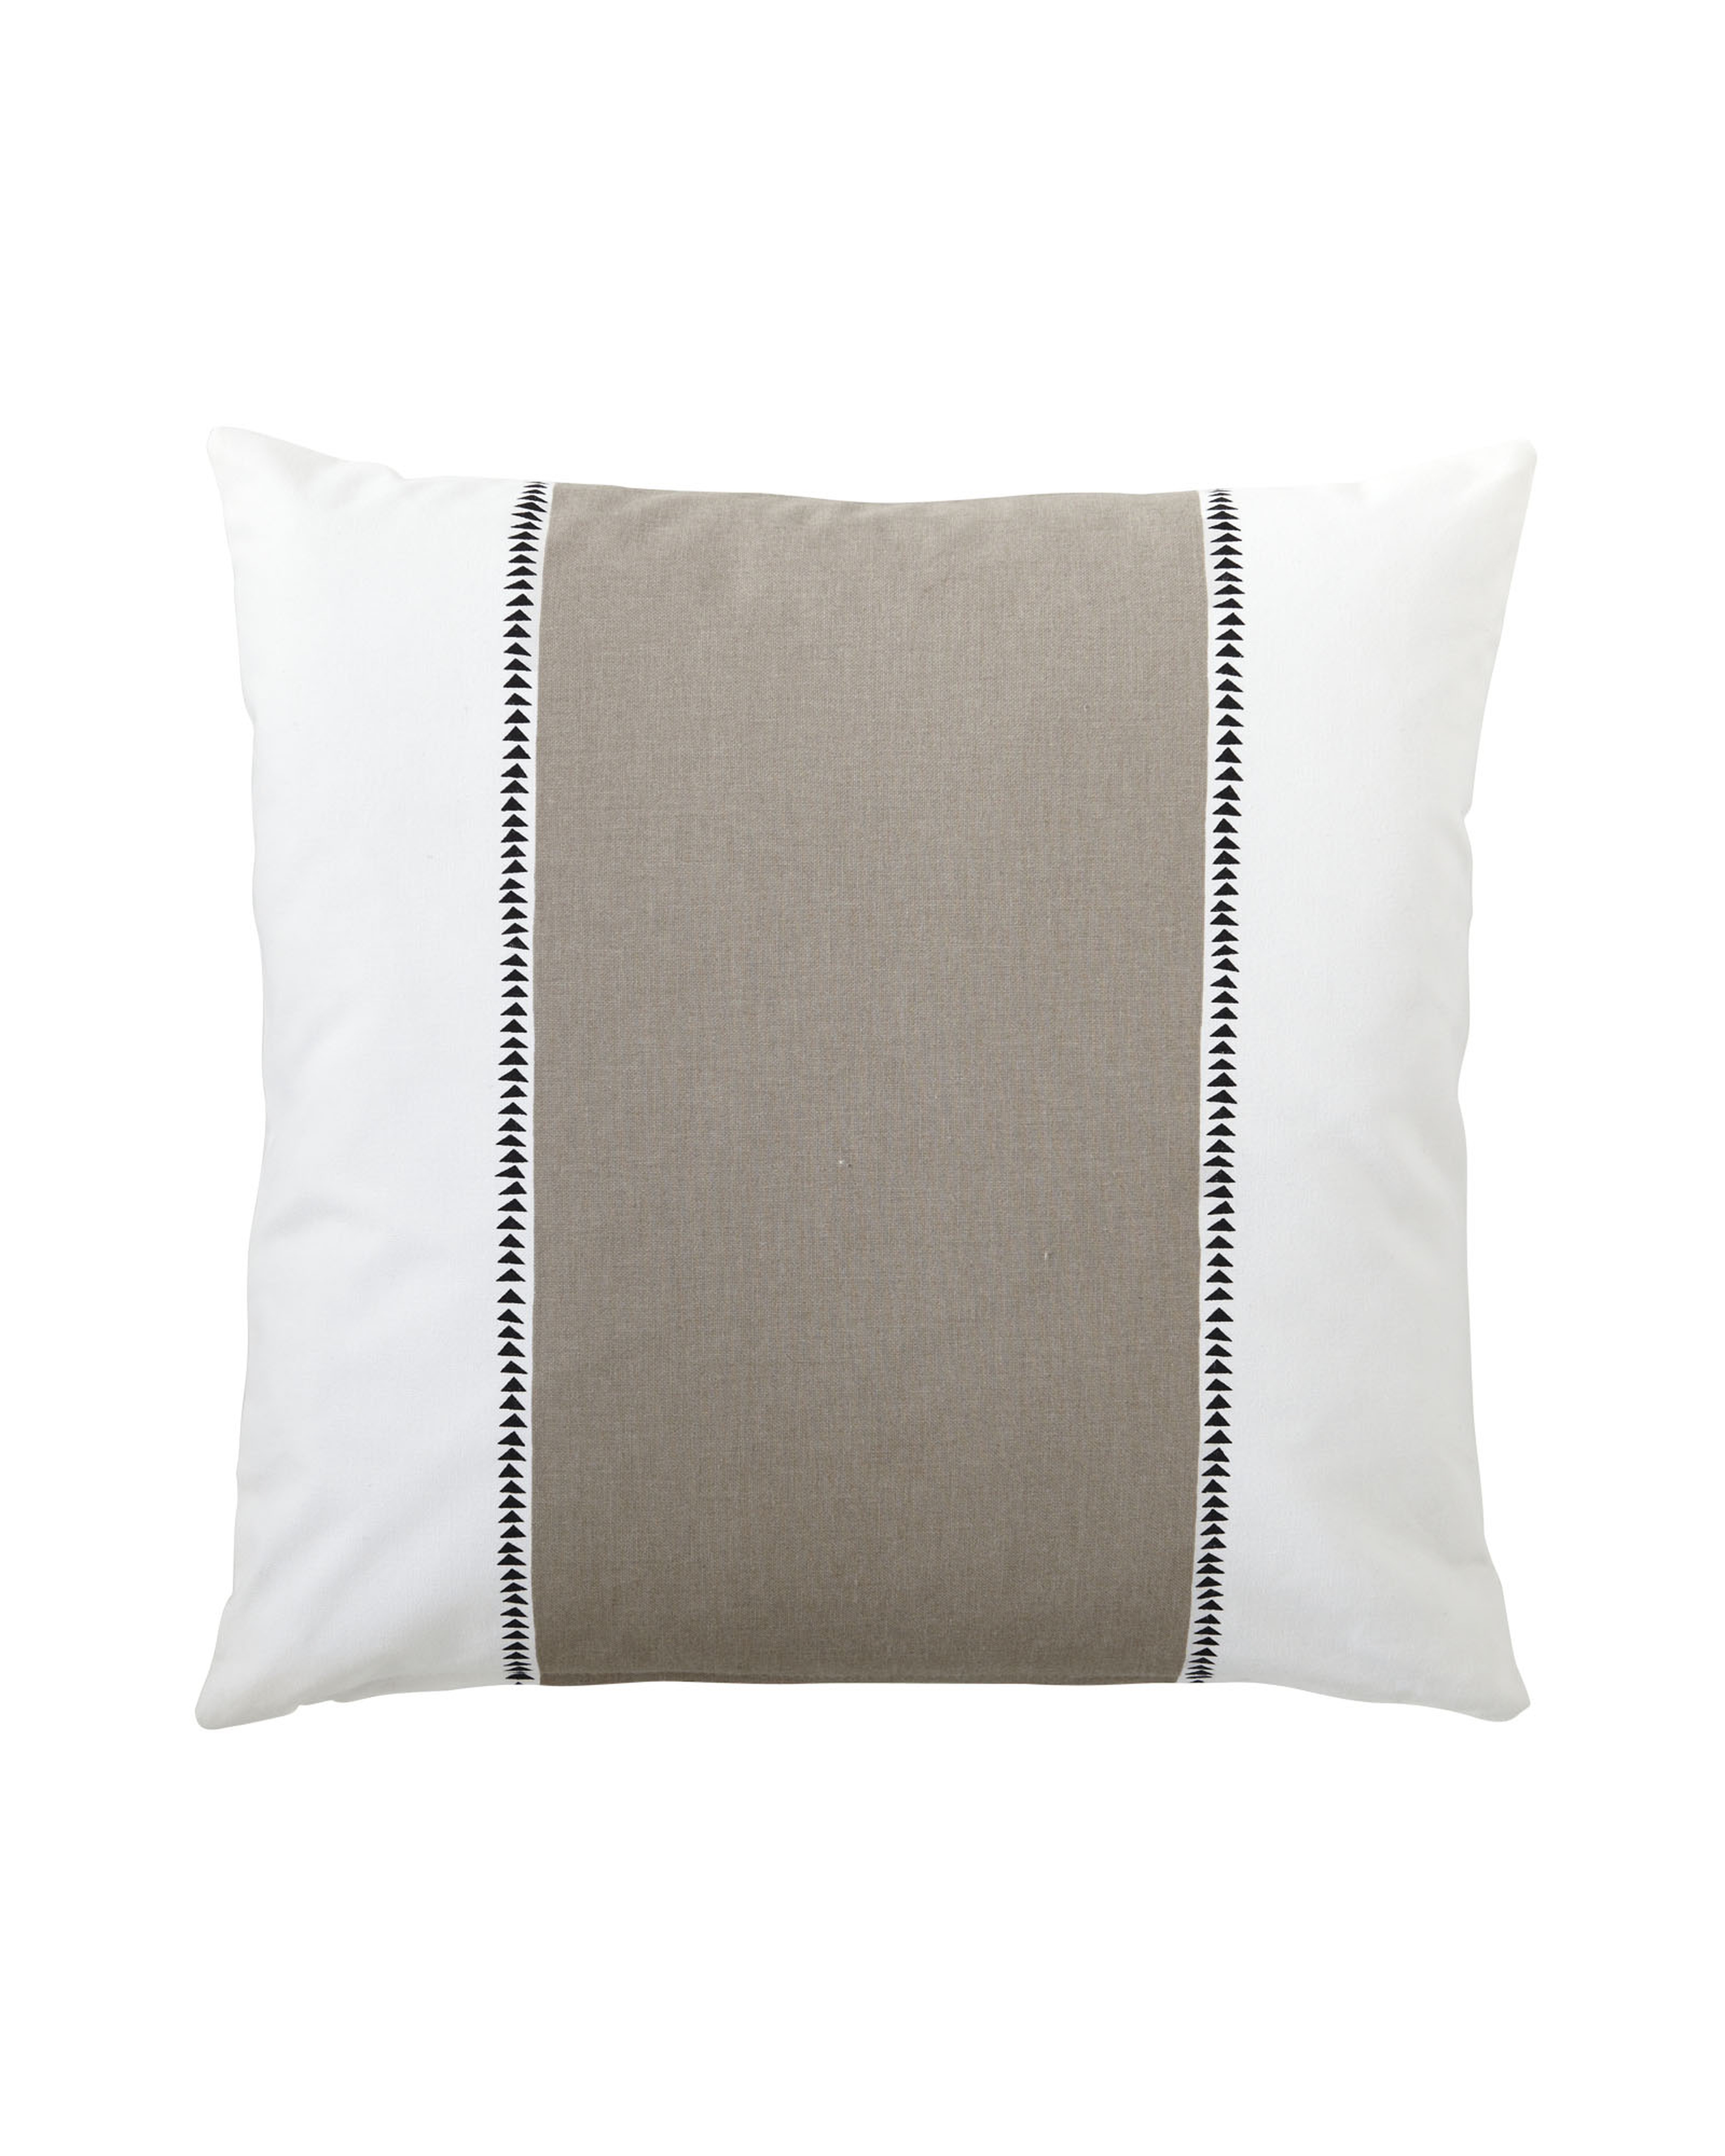 Racing Stripe Pillow Cover - Bark - 20x20 - Insert Sold Separately - Serena and Lily